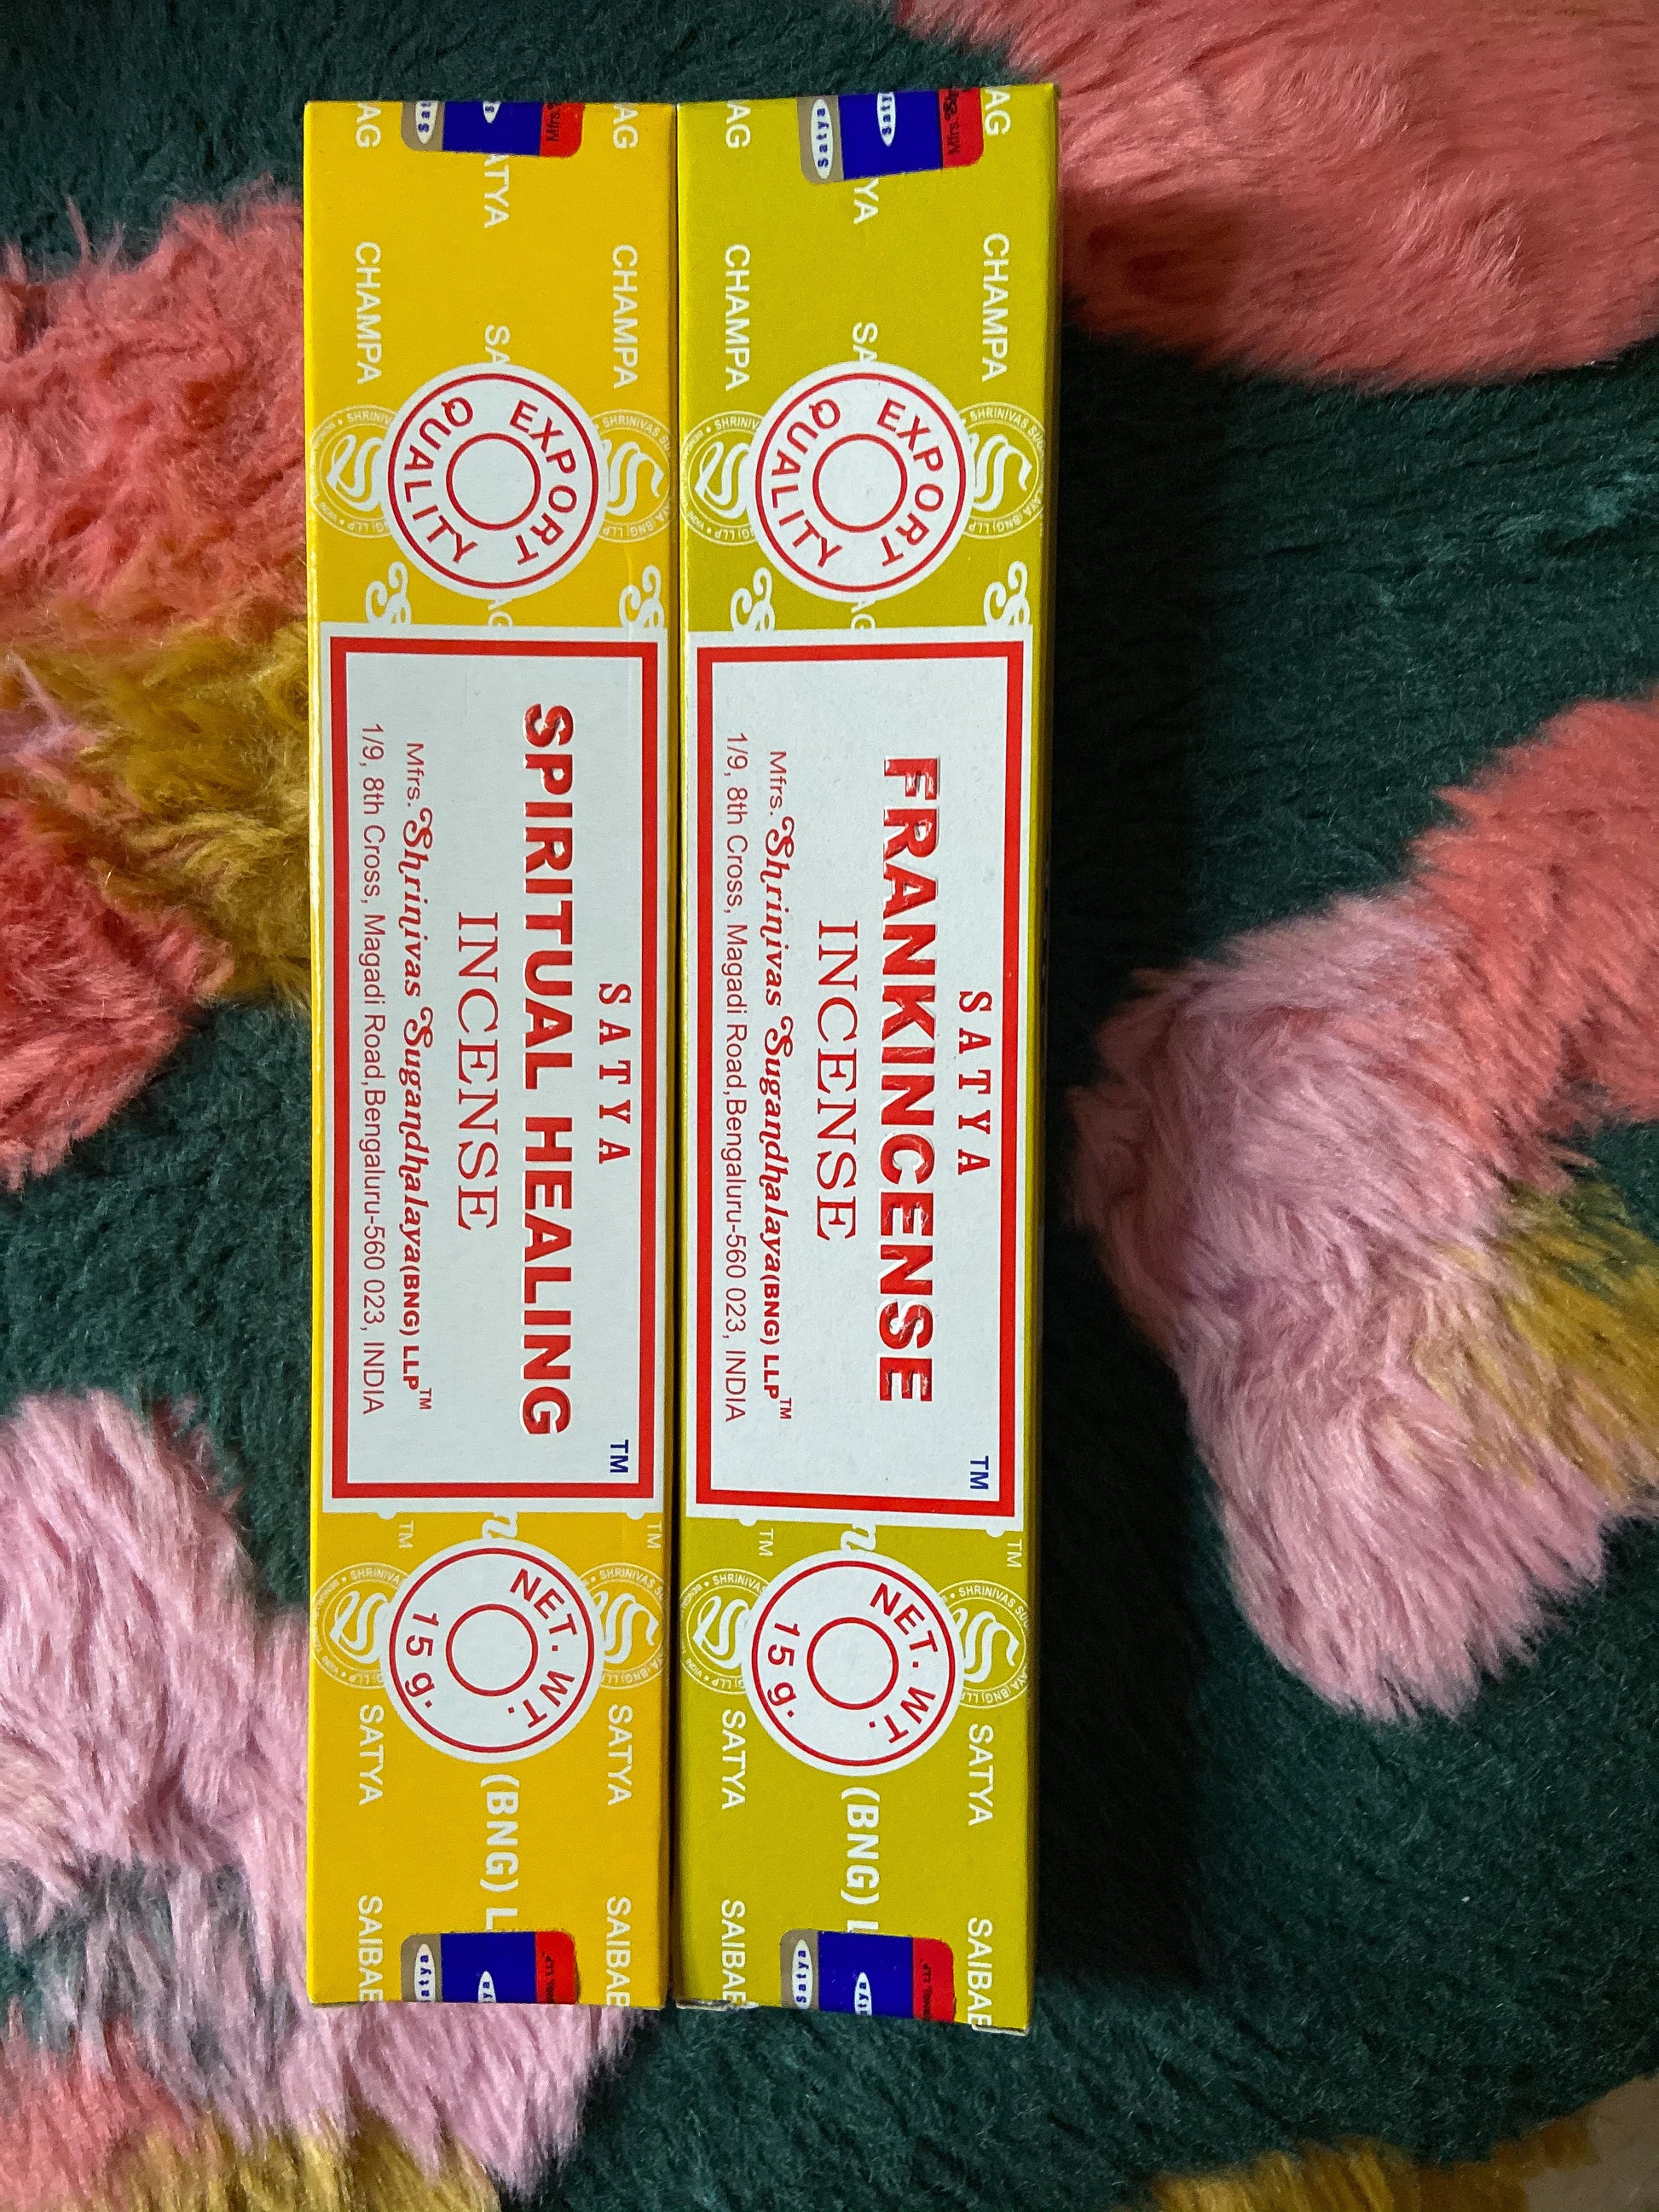  Spiritual Healing Incense Sticks - Incense available at Amazing Creations Products . Grab yours for $4.99 today!